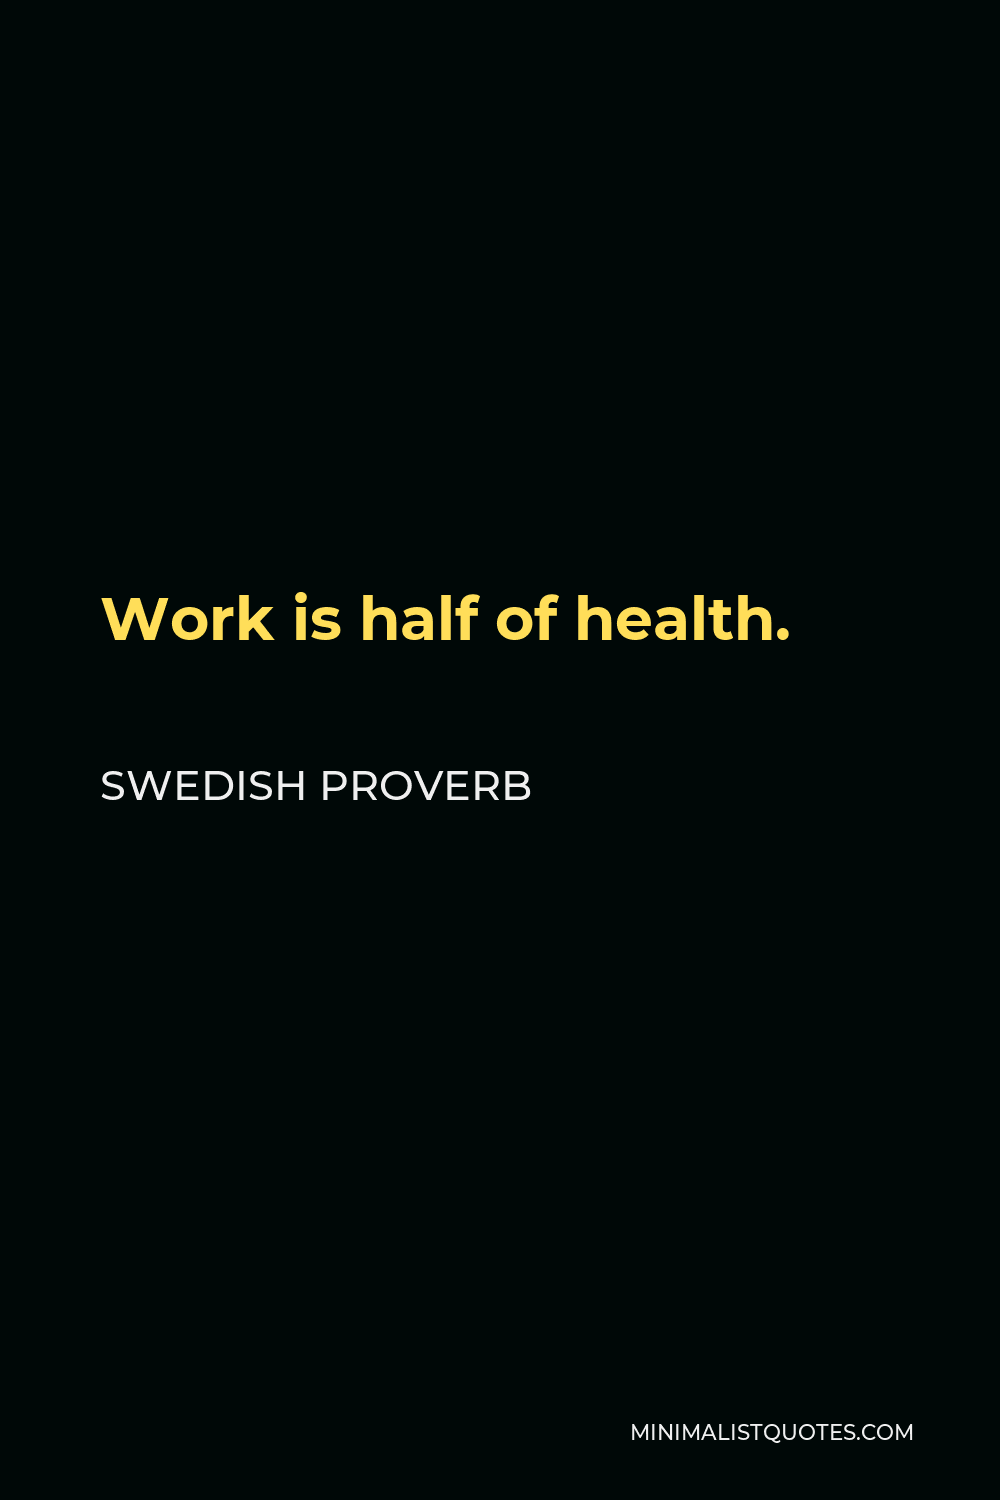 Swedish Proverb Quote - Work is half of health.